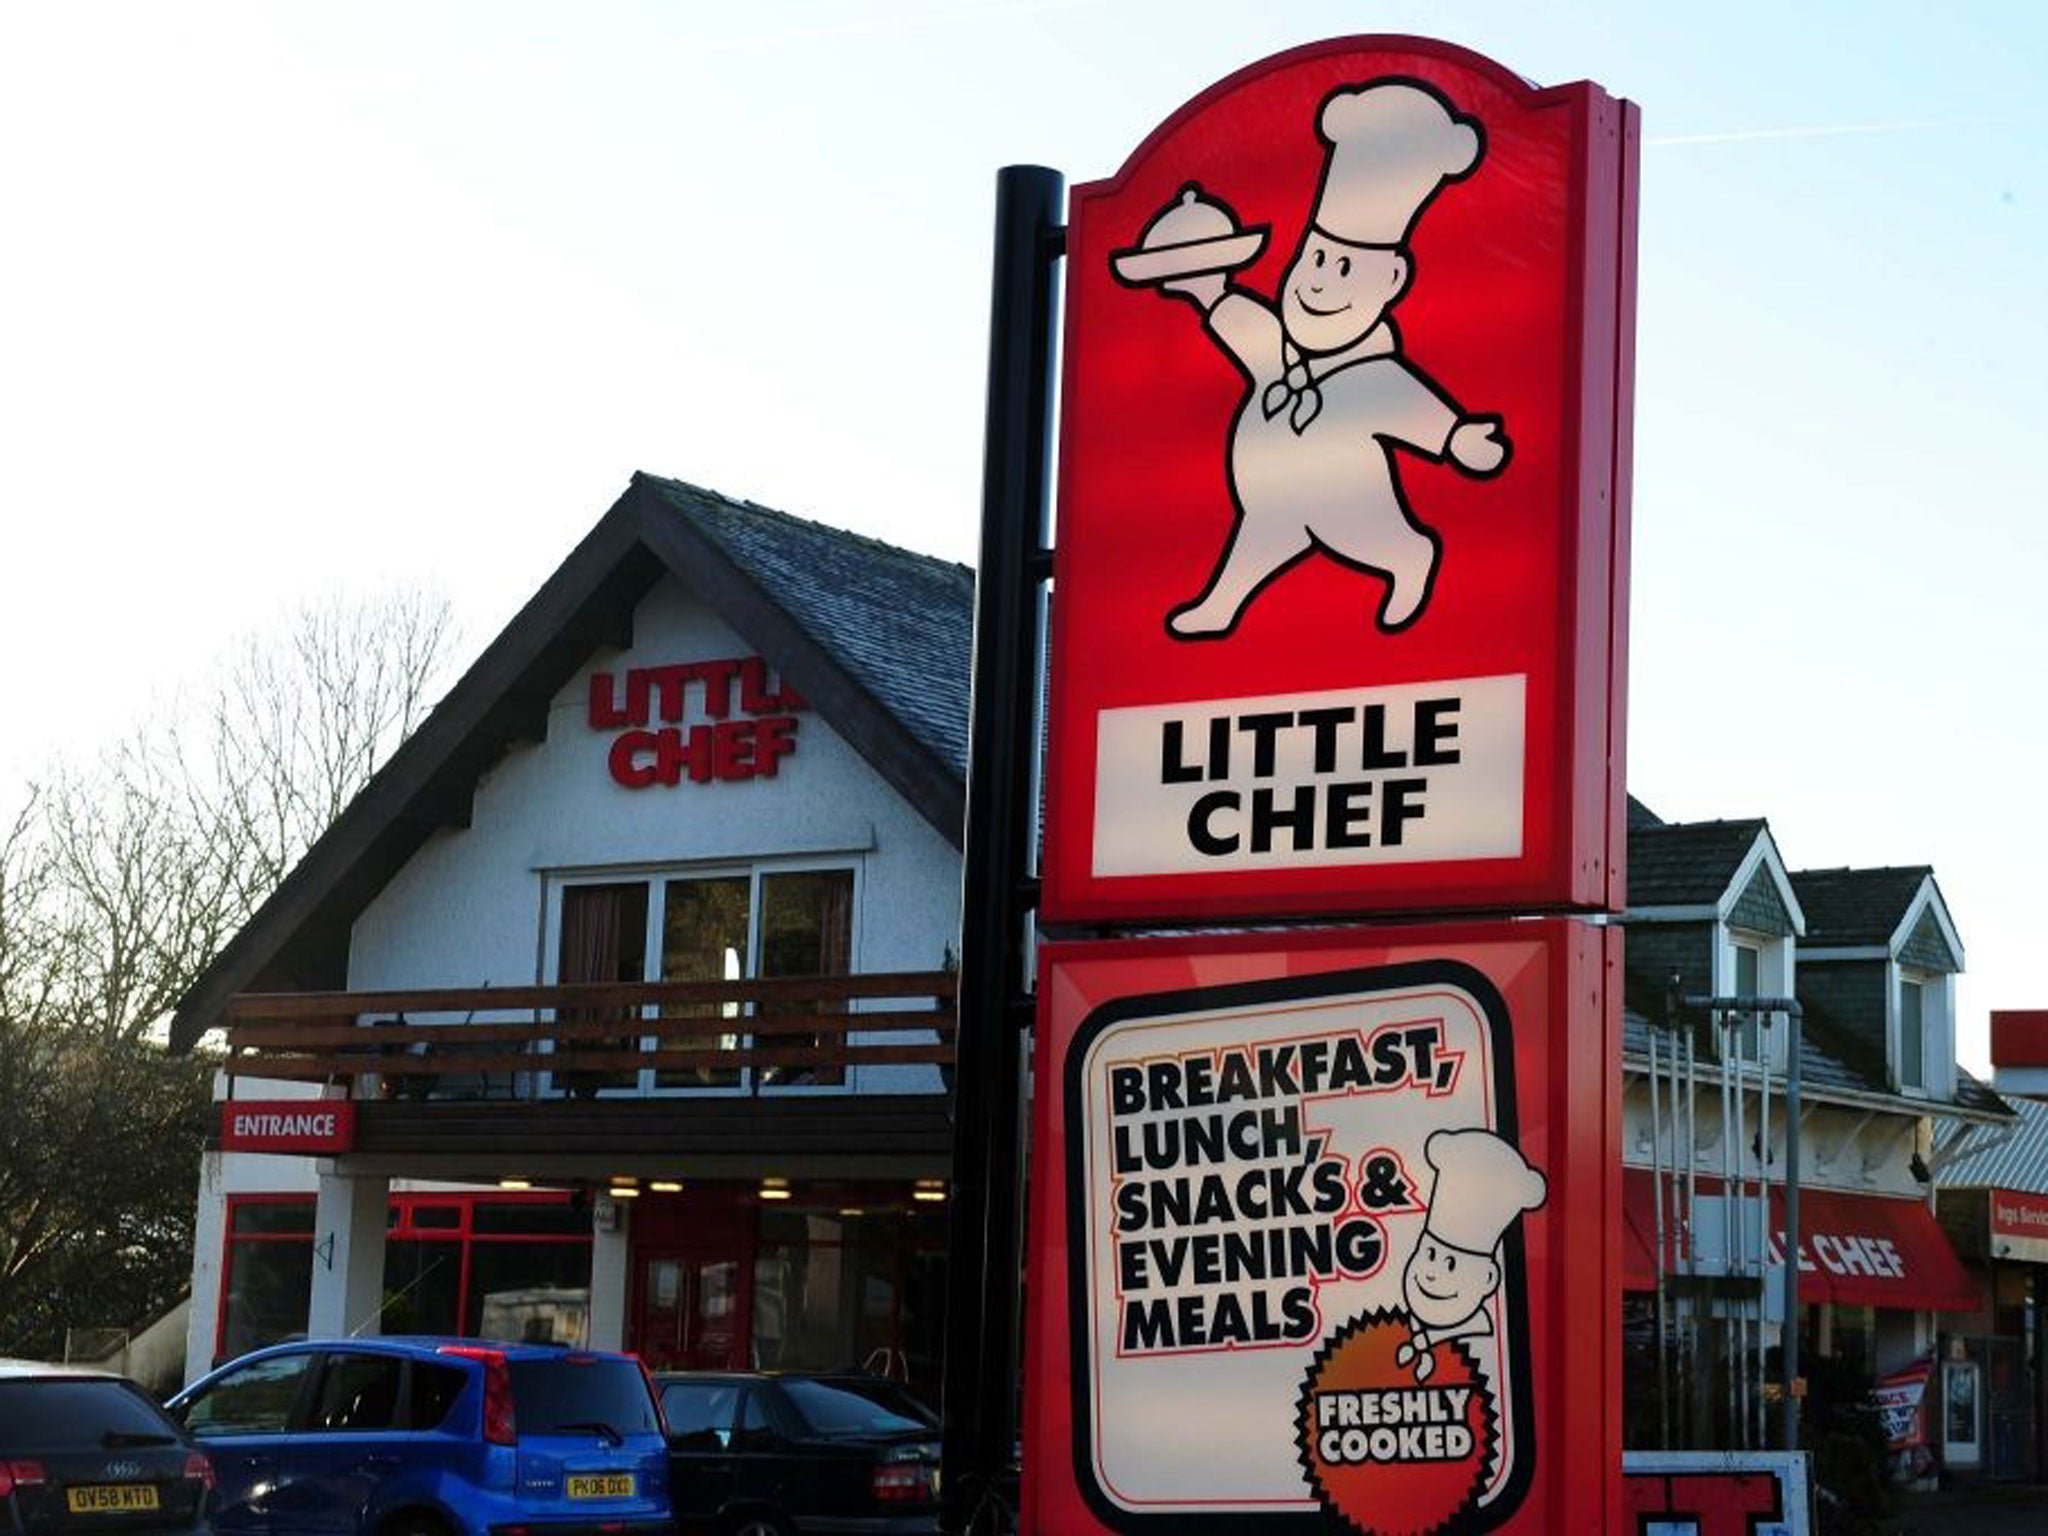 The restaurant chain Little Chef has been saved from disappearing from Britain's roadsides after being snapped up by a Kuwaiti company for £15 million.